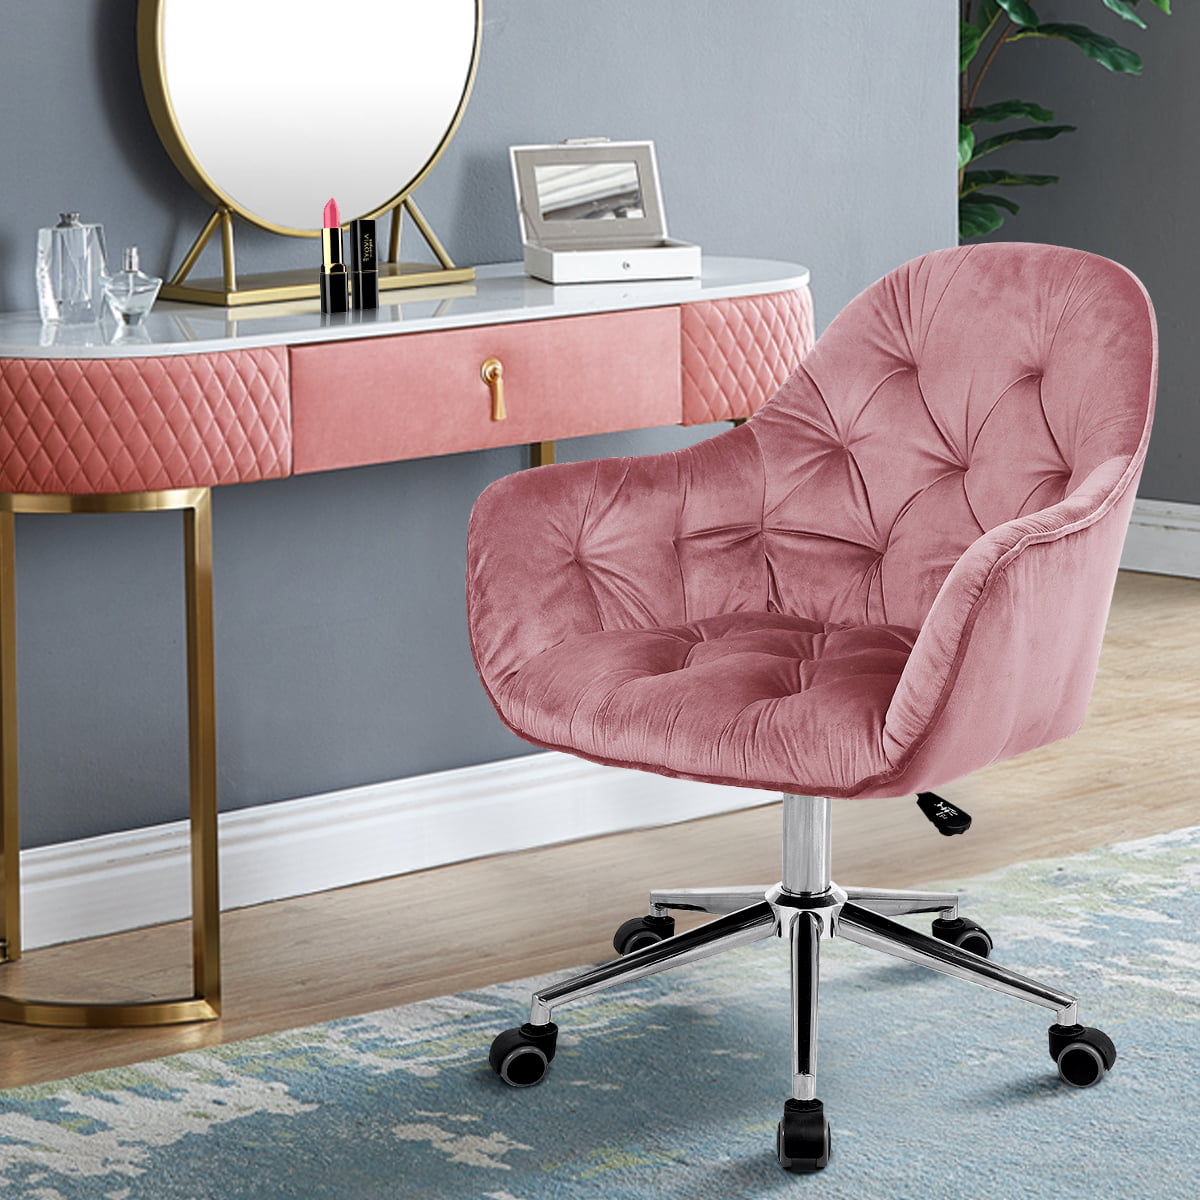 Pink Home Living Chair Office Chair Button-Tufted Velvet Accent Mid-Back Computer Desk Chairs W/Wheels and Arms Adjustable Height Swivel Task Chair for Study Living Bedroom